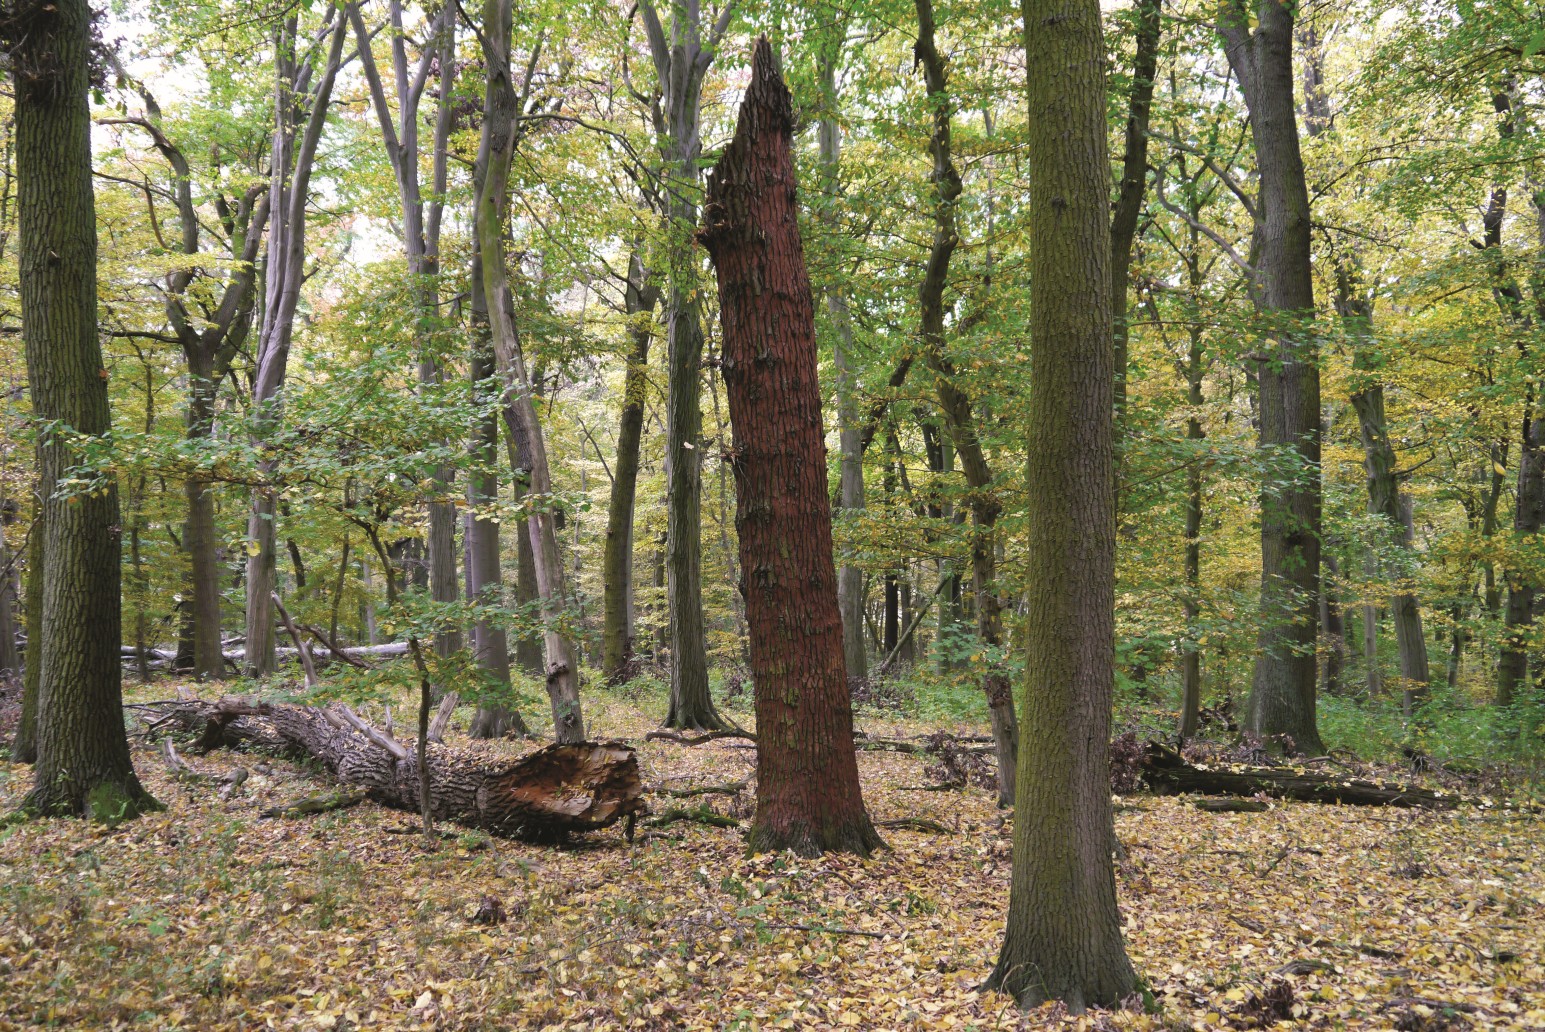 The picture shows a sparse near-natural forest with deciduous trees. A tree has broken off at a great height. A large broken trunk lies on the ground.  